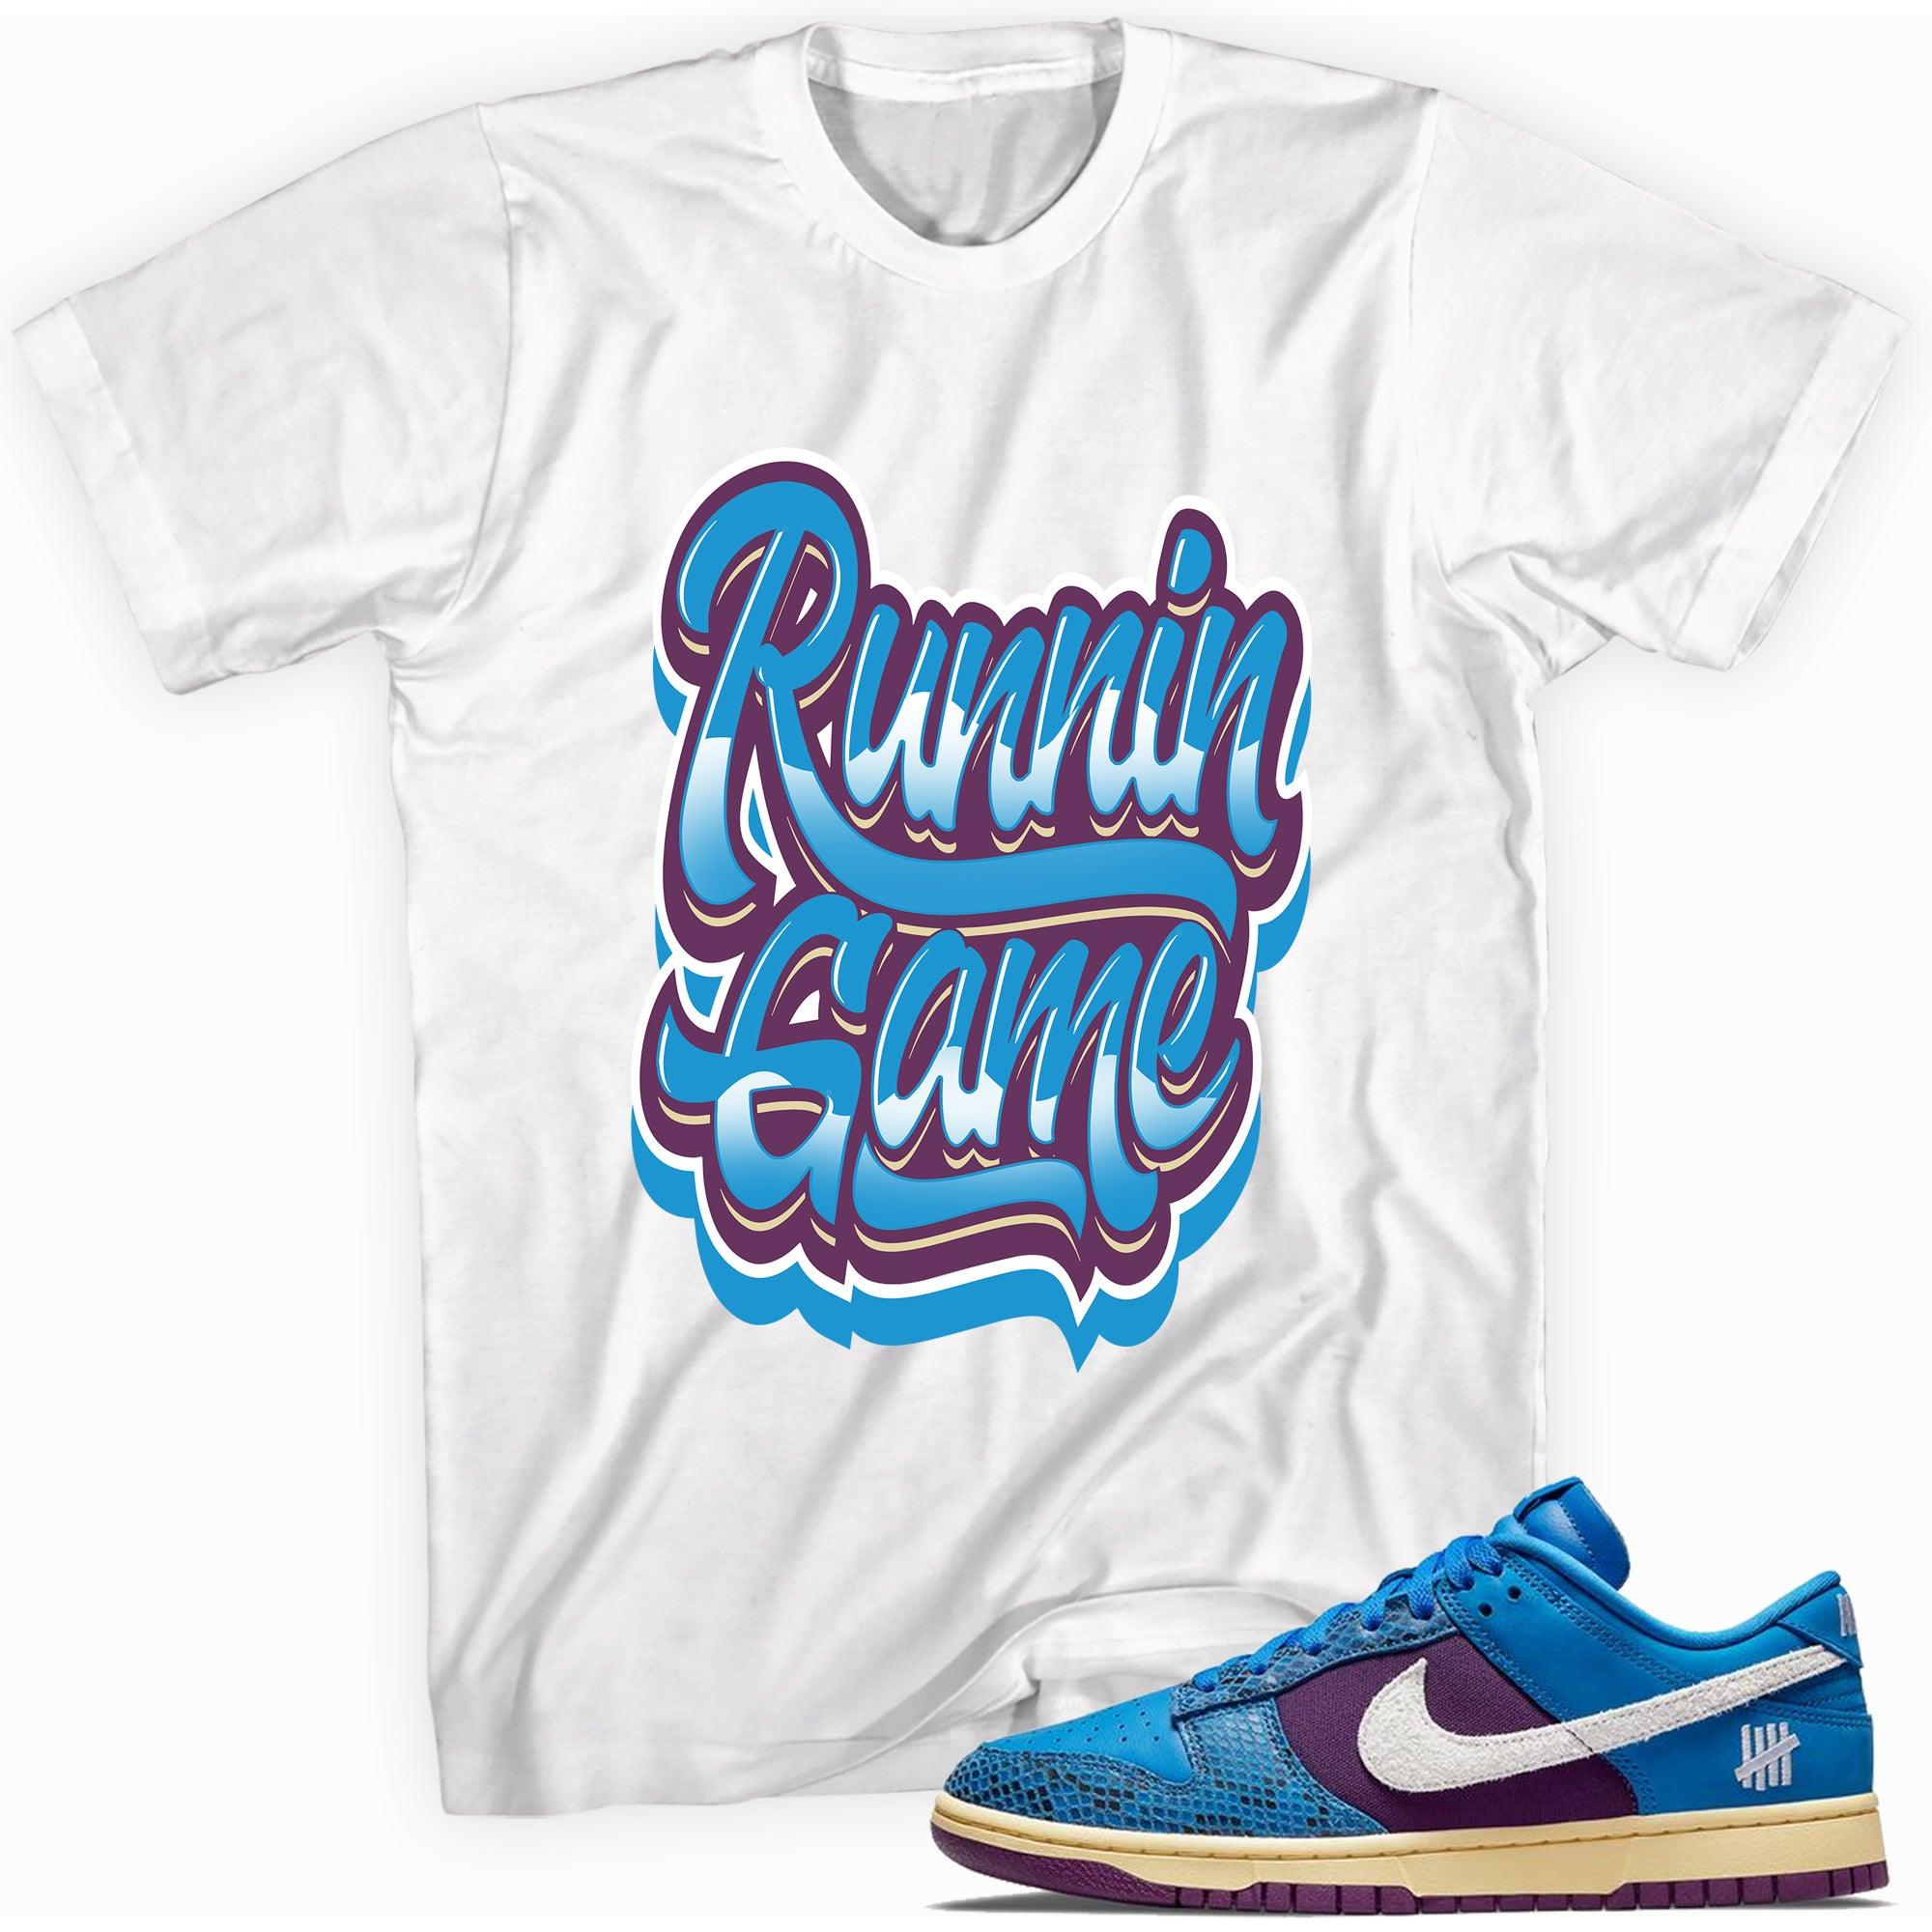 Runnin Game Shirt Nike Dunk Low Undefeated 5 On It Dunk vs AF1 Sneakers photo